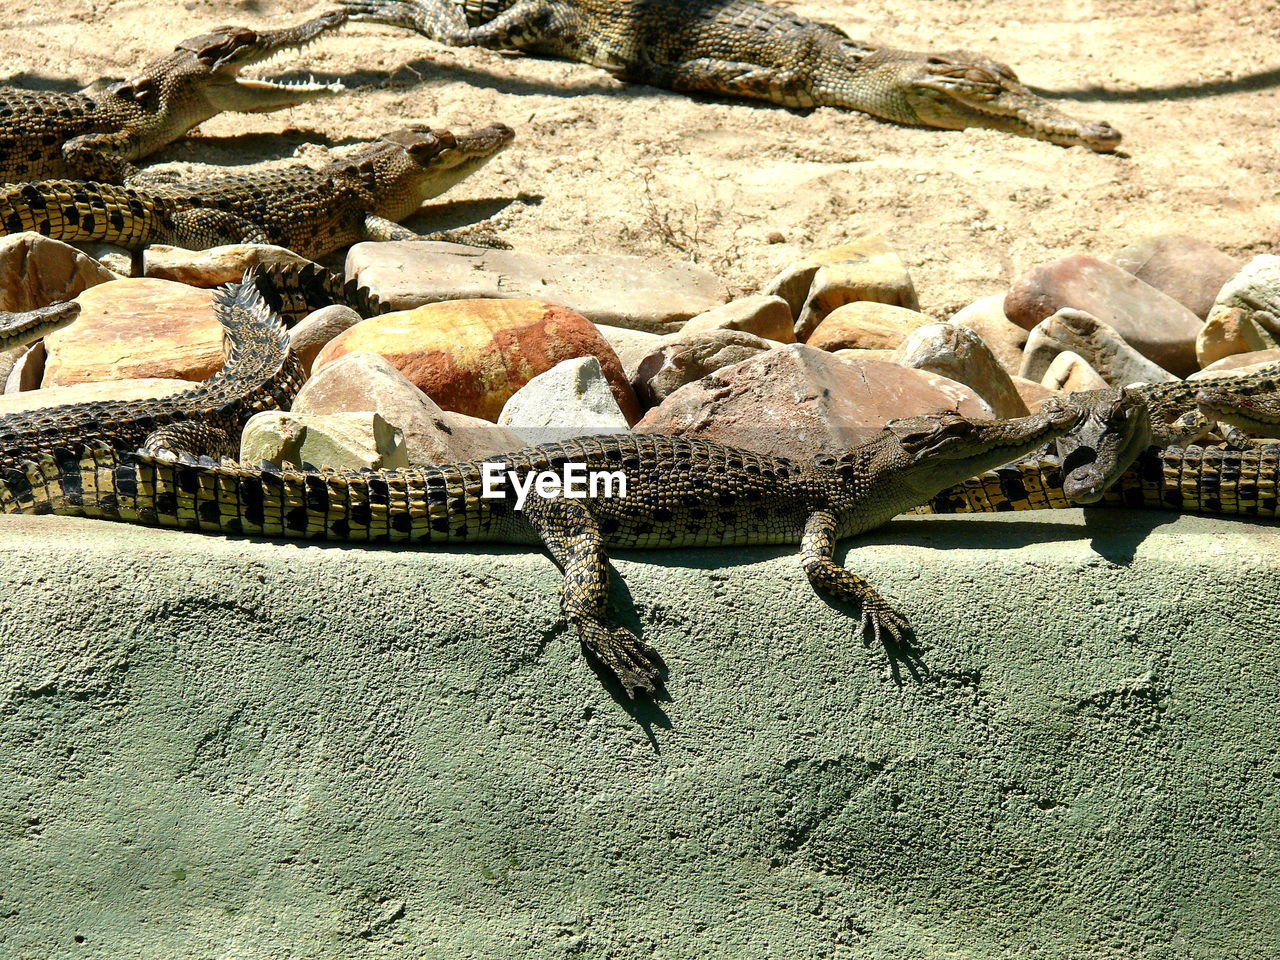 CLOSE-UP OF CROCODILE IN ZOO